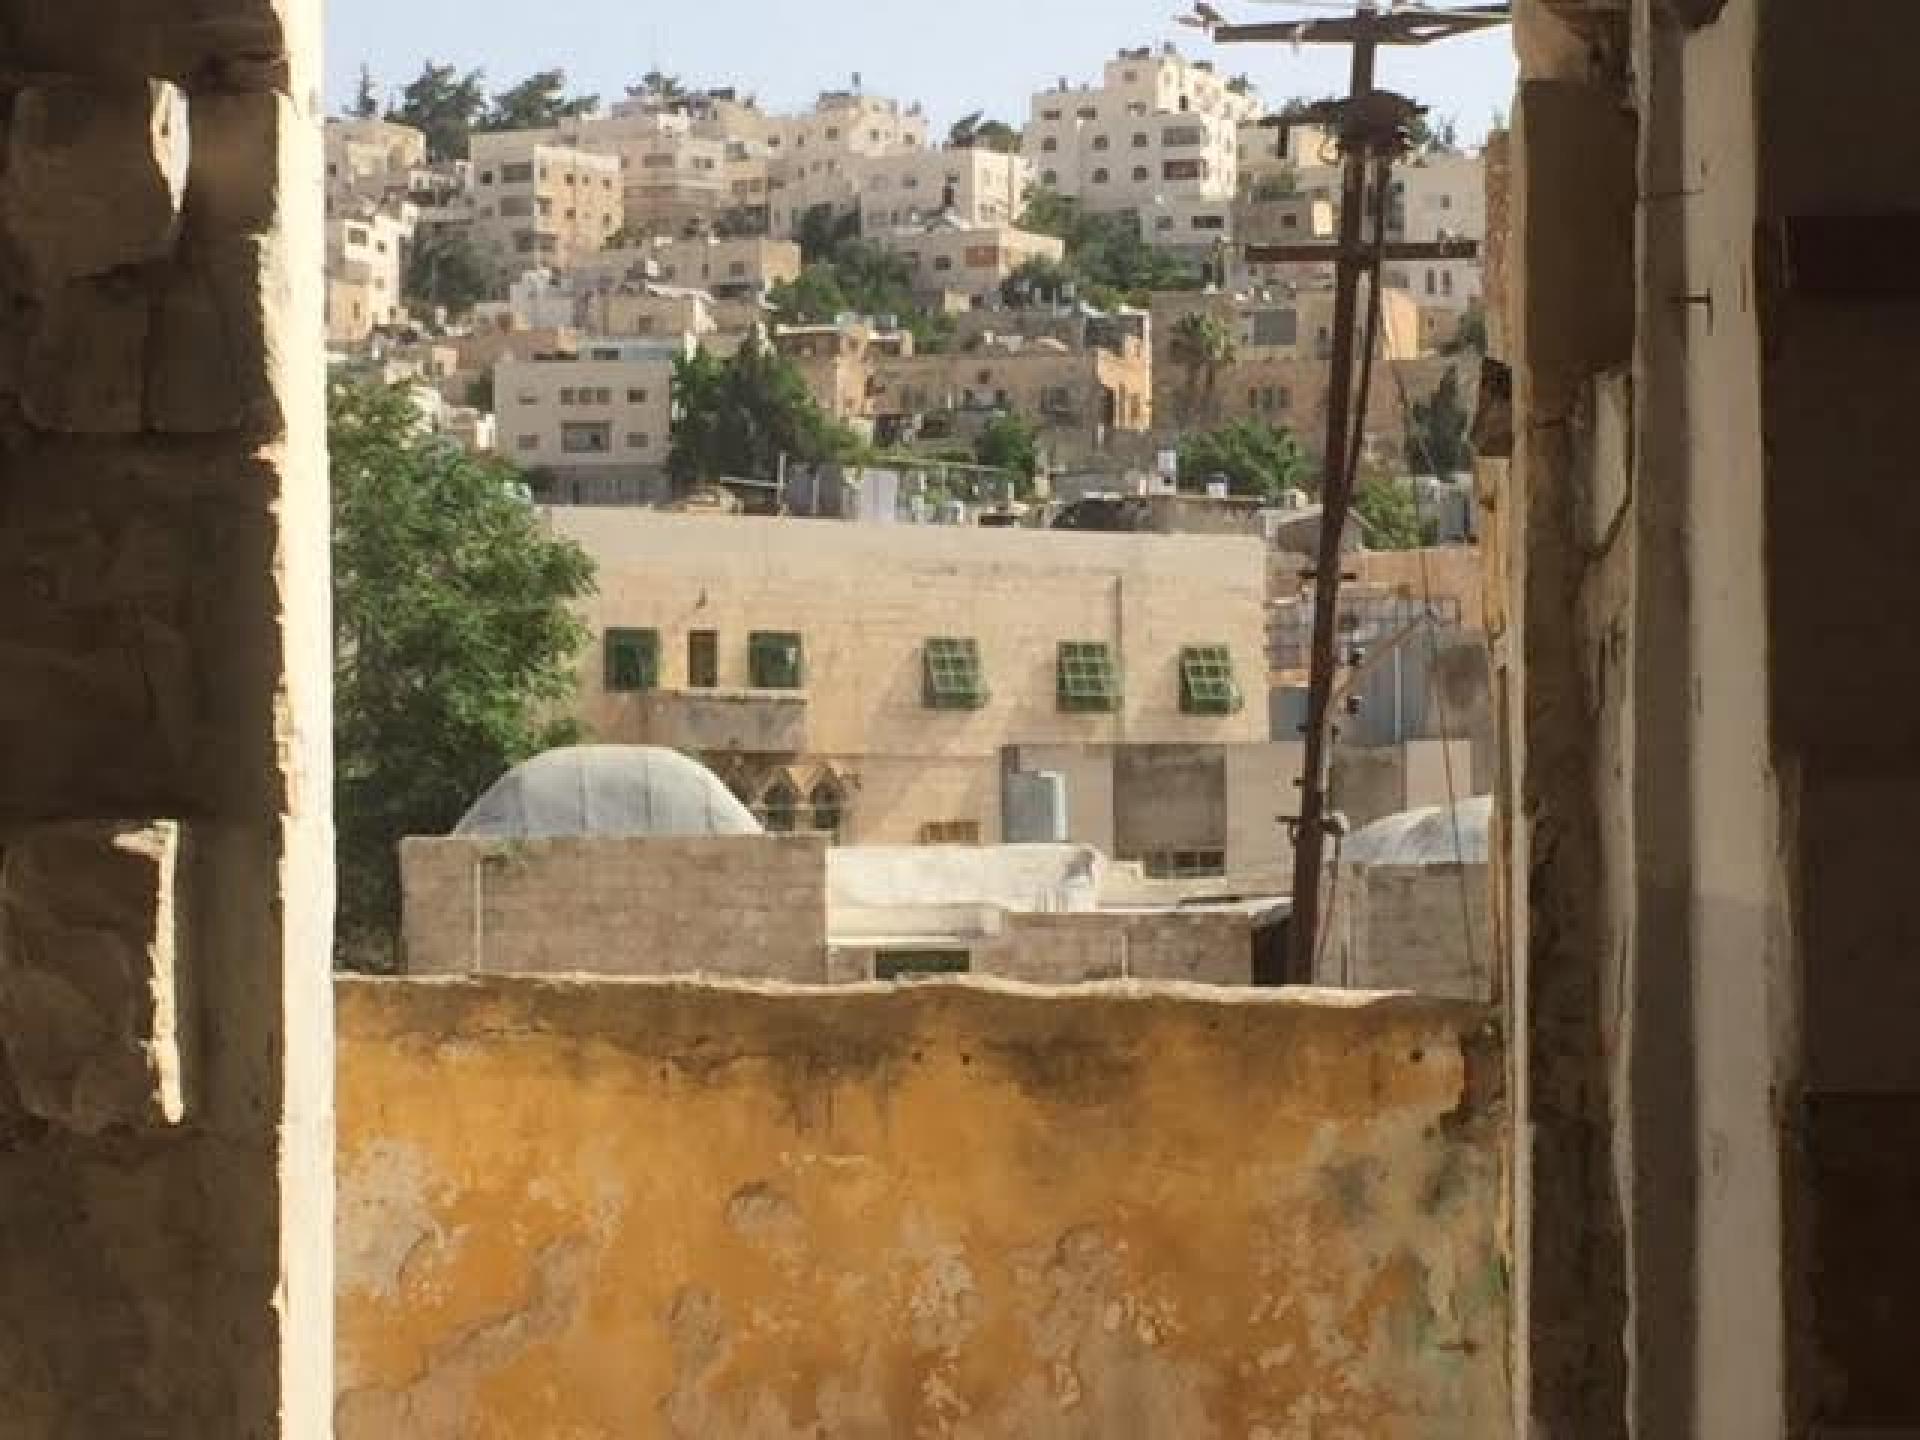 The view from the windows of the building in Hebron